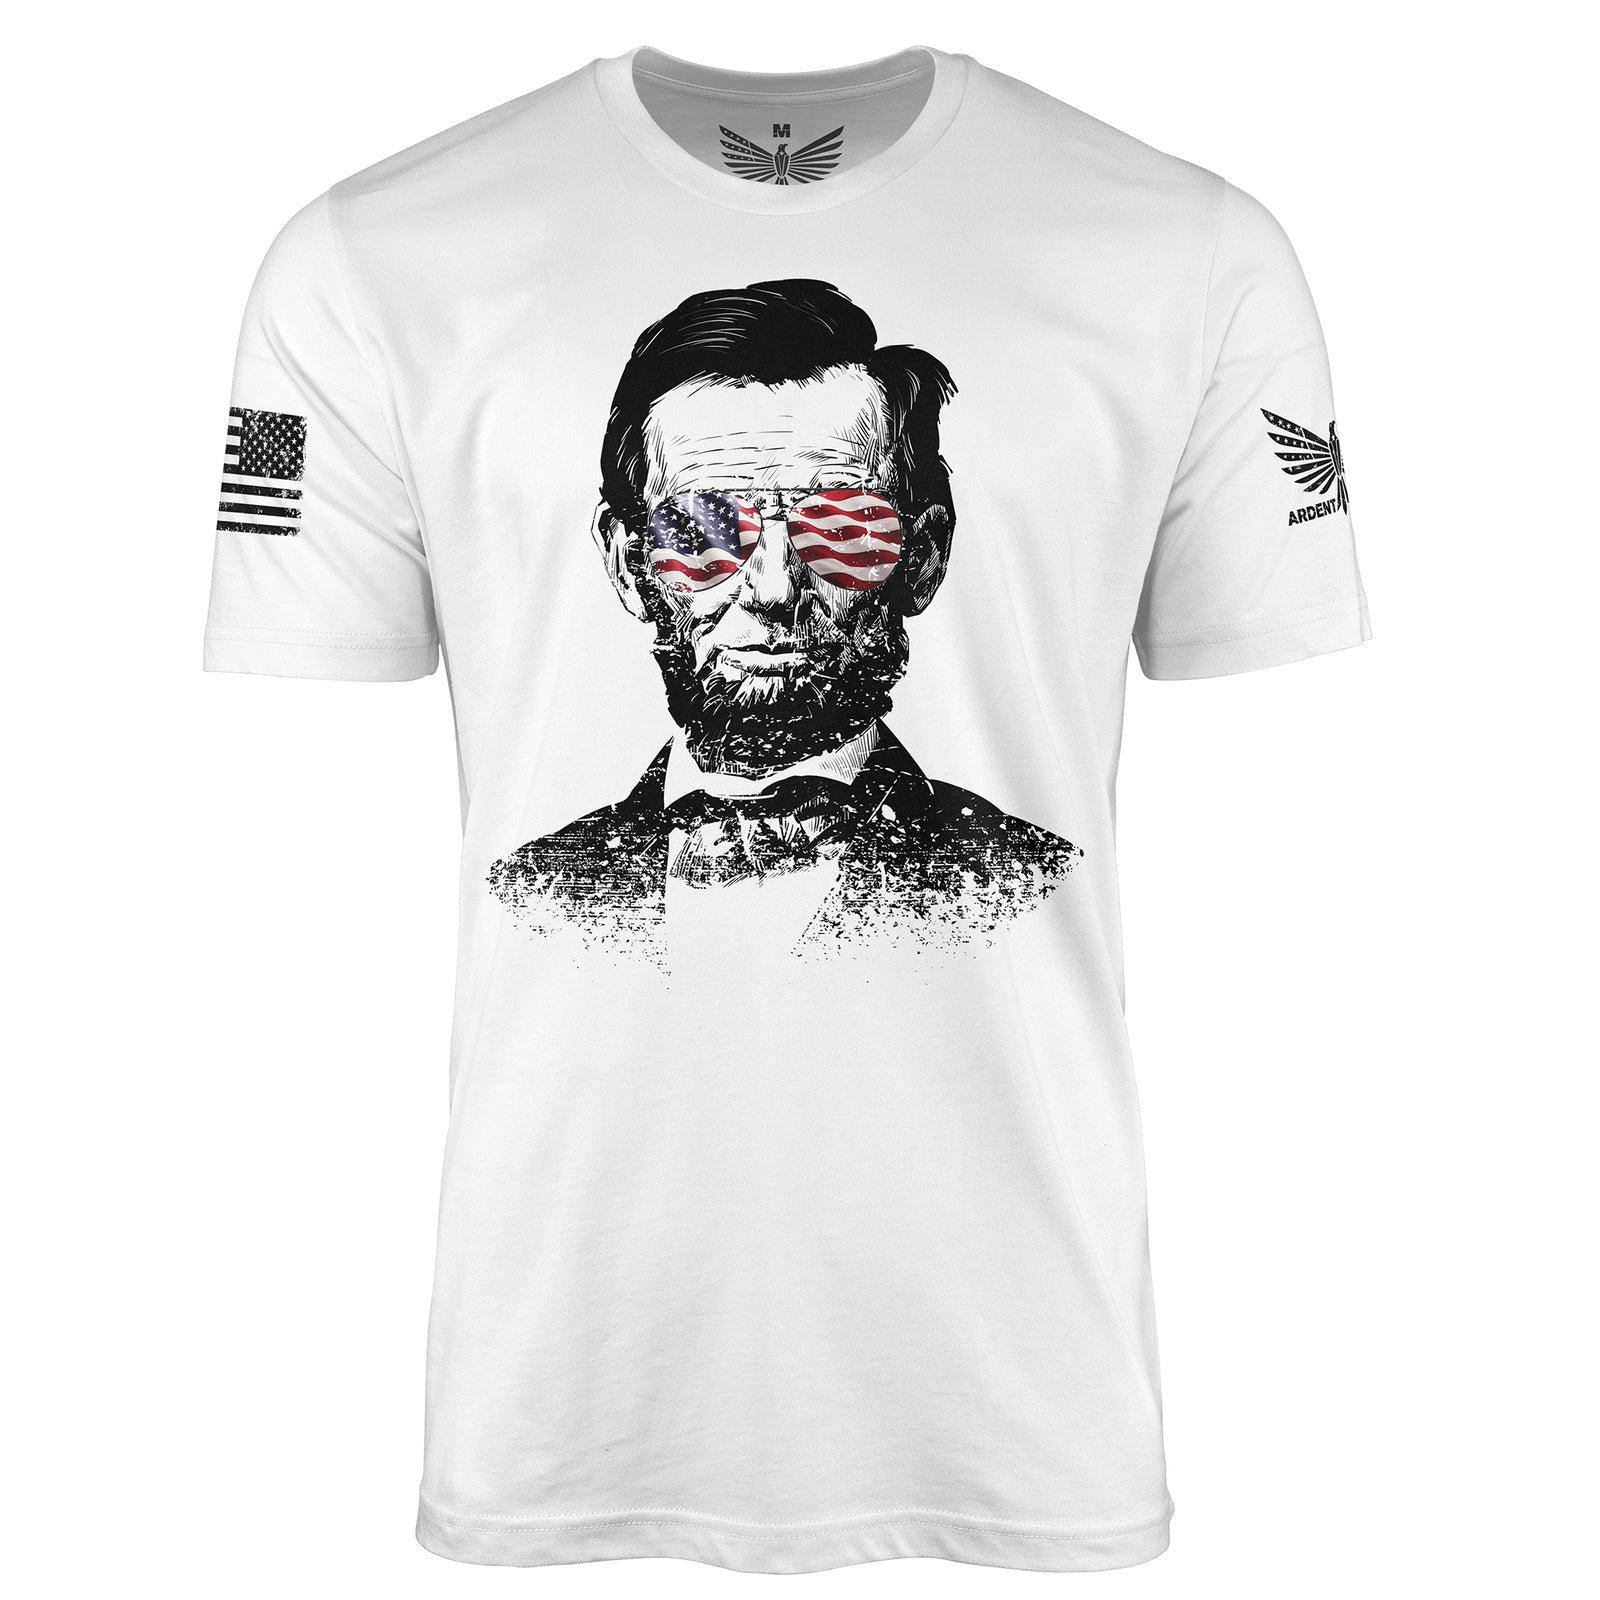 Party Like Lincoln-Men's Shirt-S-Ardent Patriot Apparel Co.